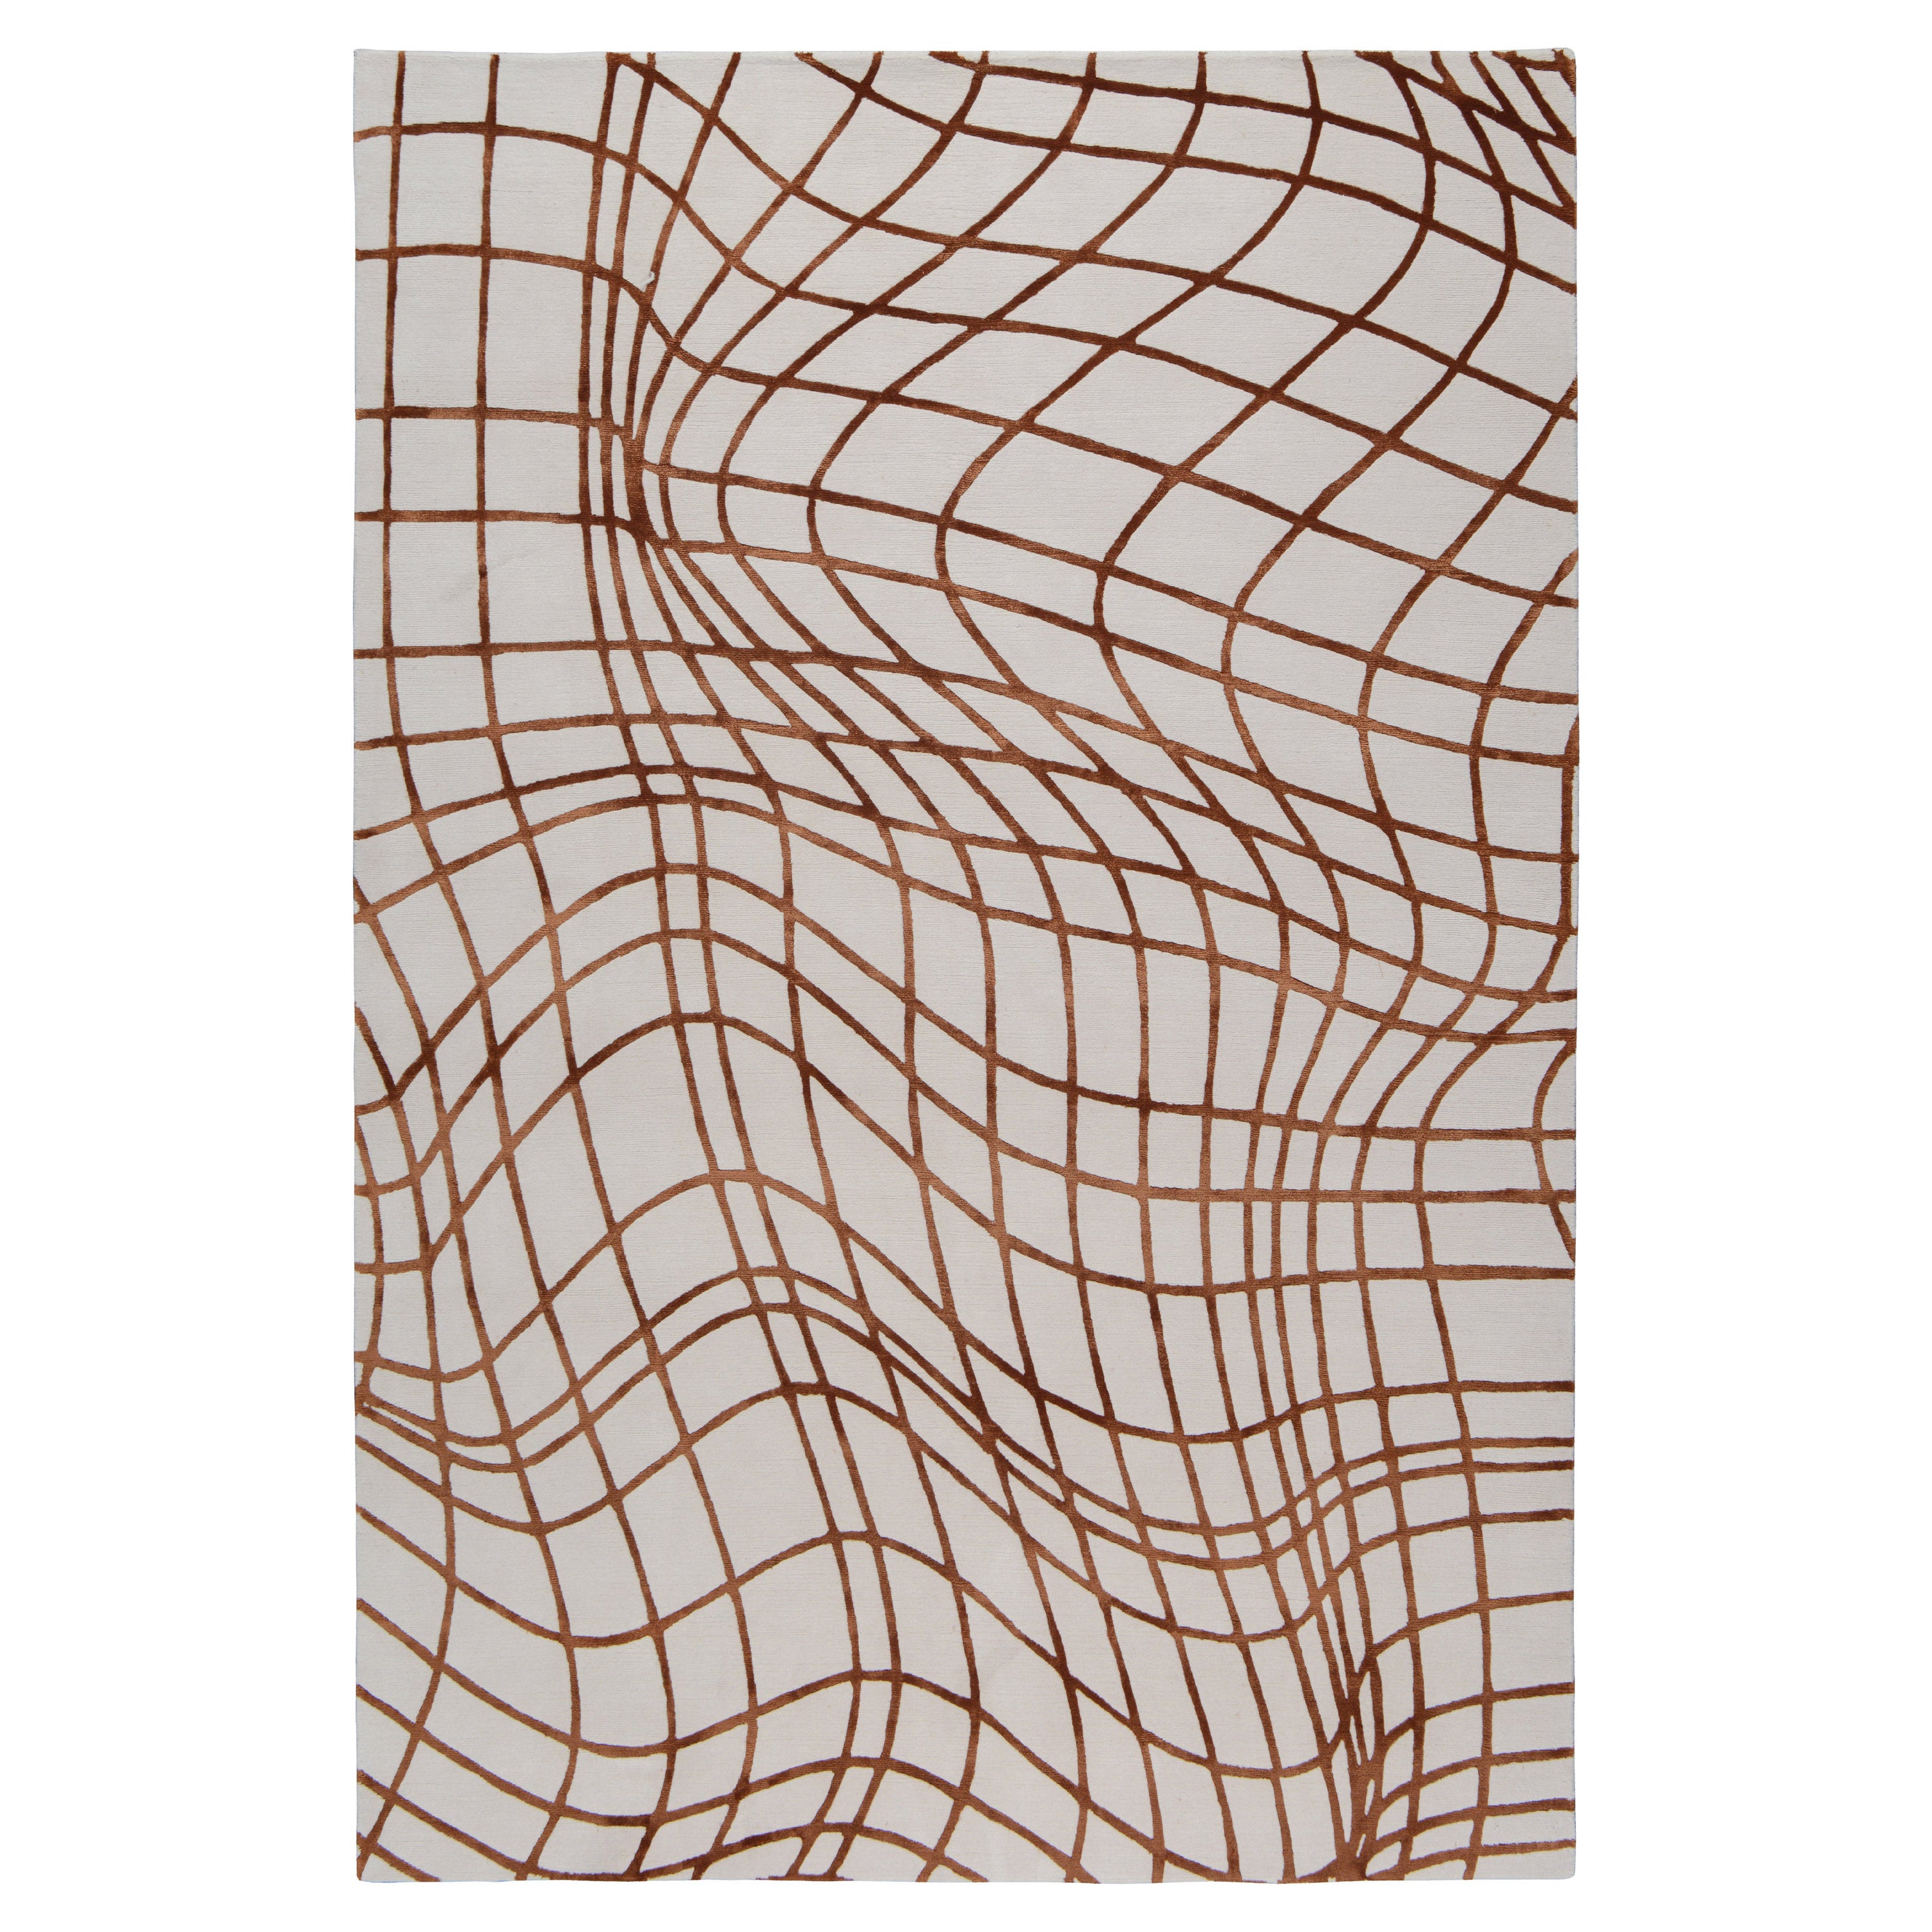 Wavelength features a distorted grid motif inspired by a 3D graph. The rug transforms the abstract lines into a bold motif, perfect for adding intrigue to a space. Woven by our expert craftspeople in Nepal using the finest wool and silk.